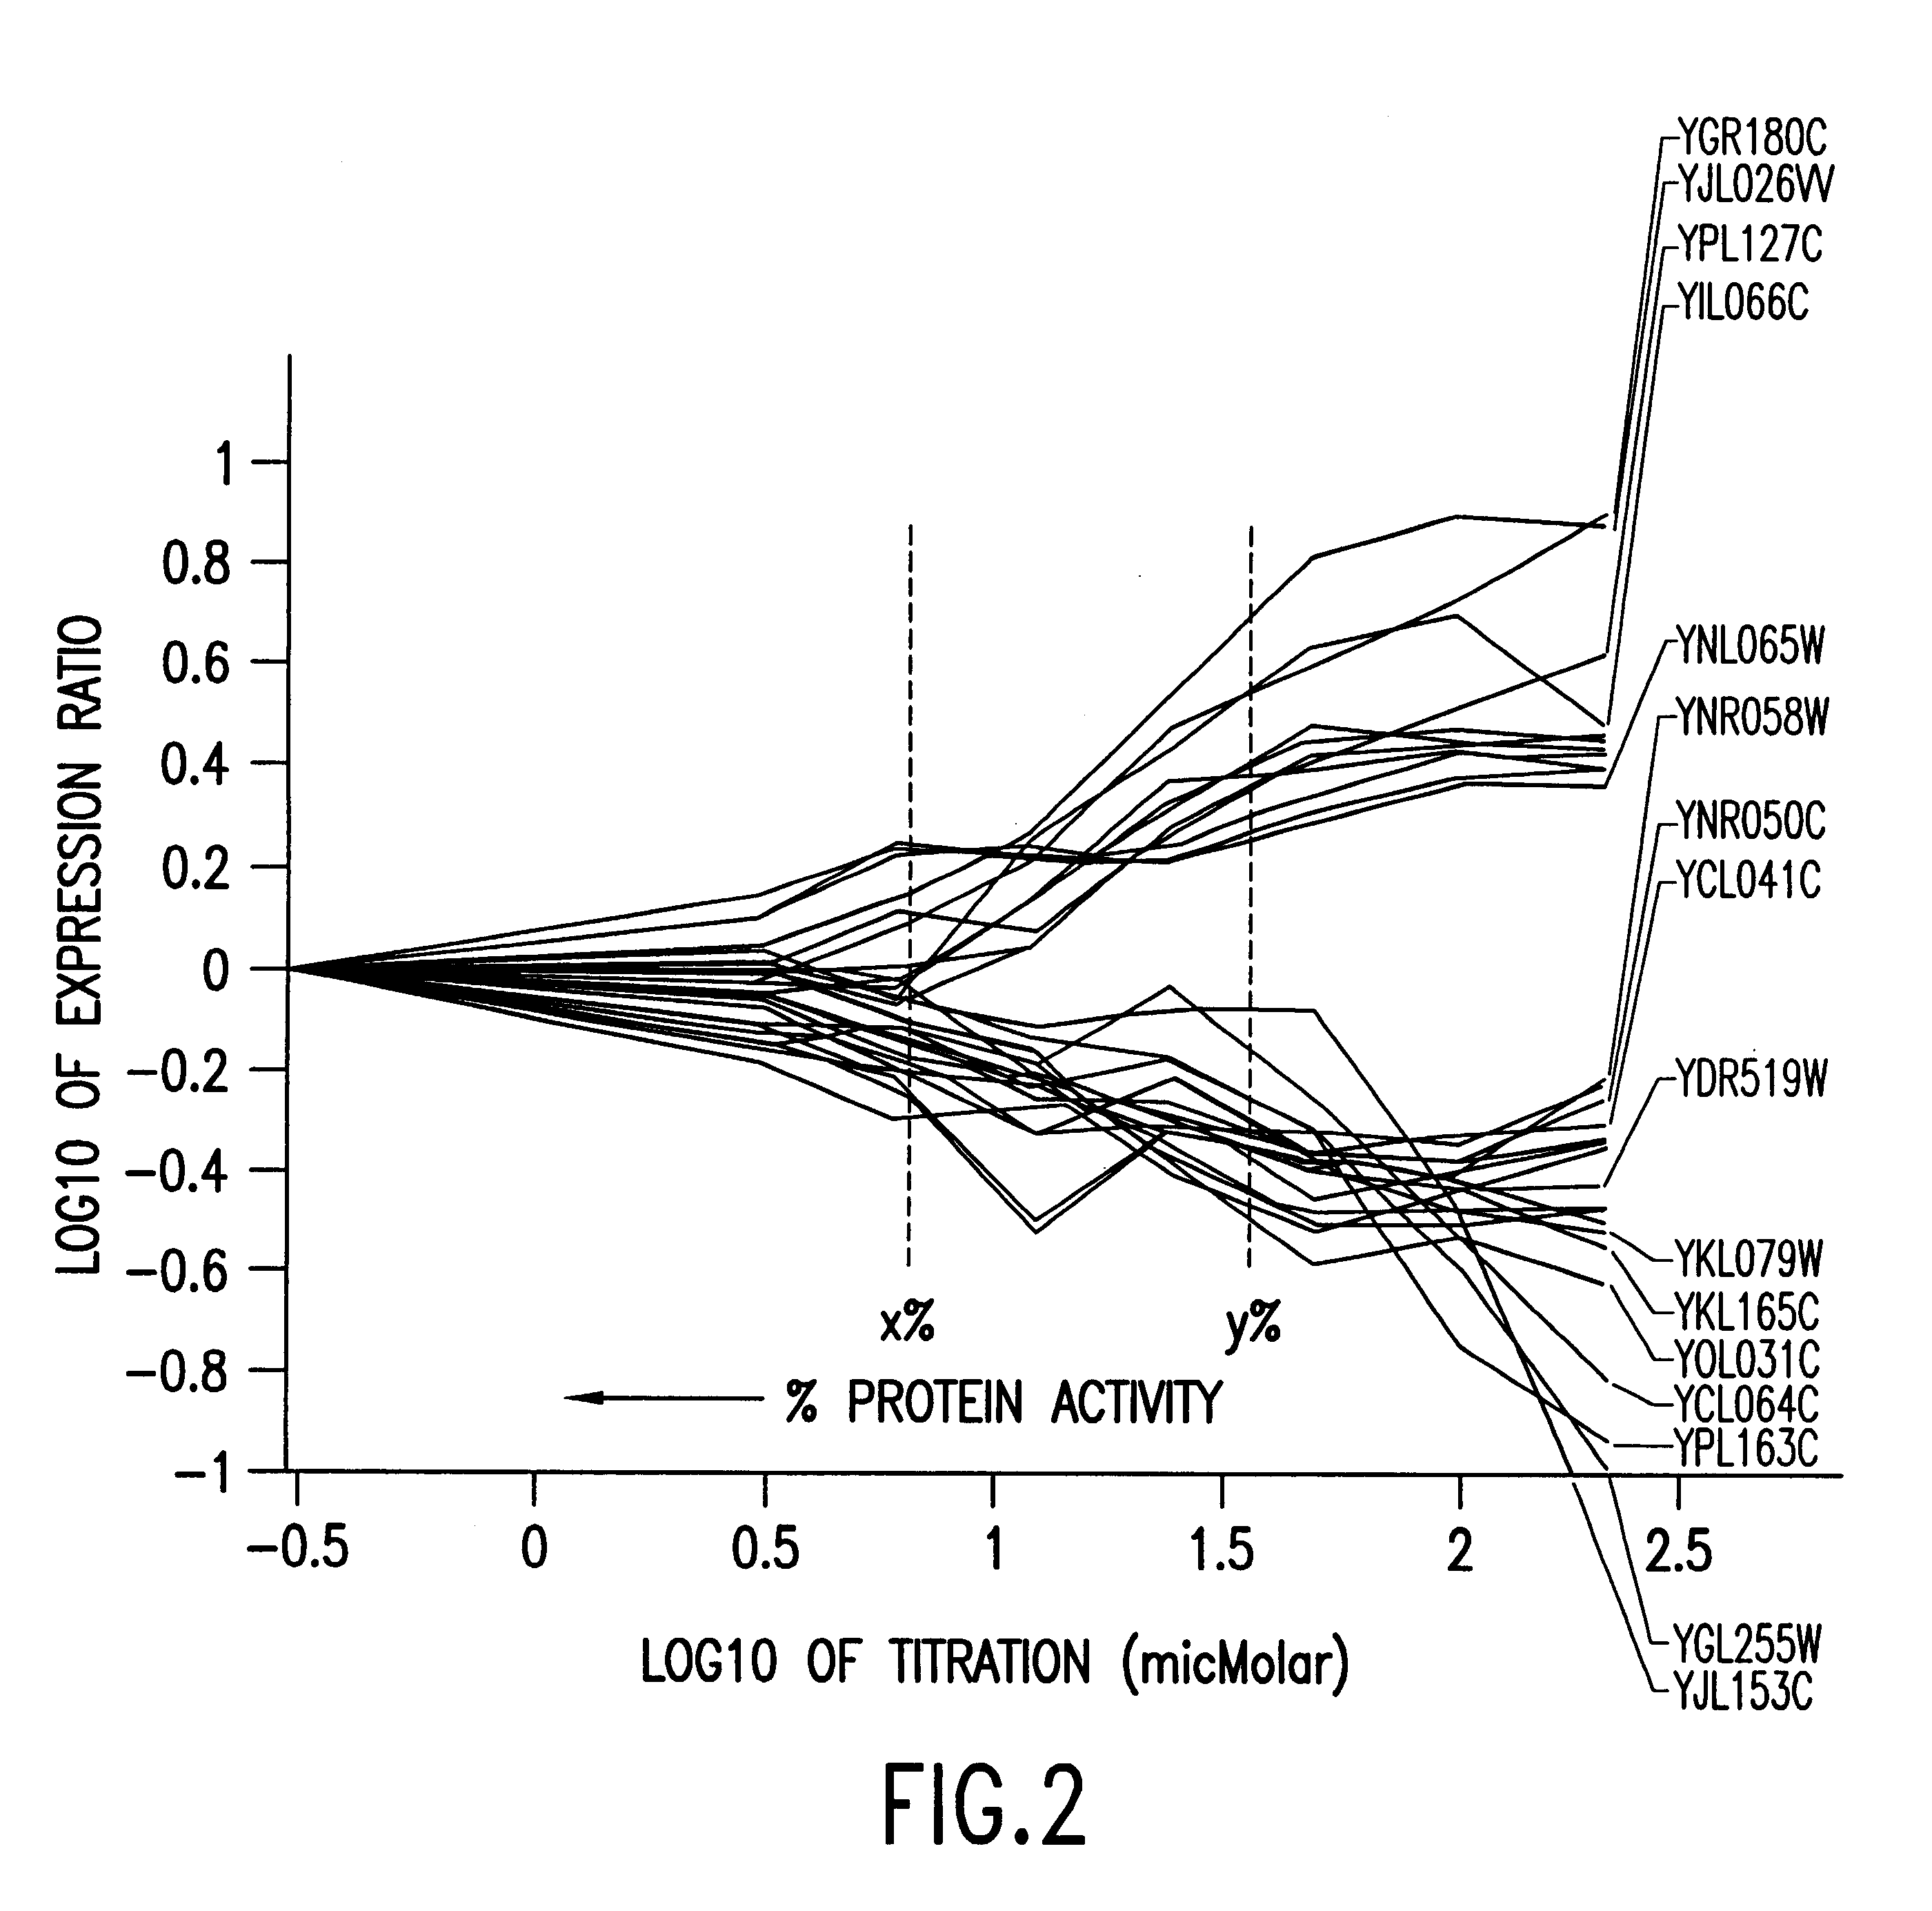 Methods of determining protein activity levels using gene expression profiles